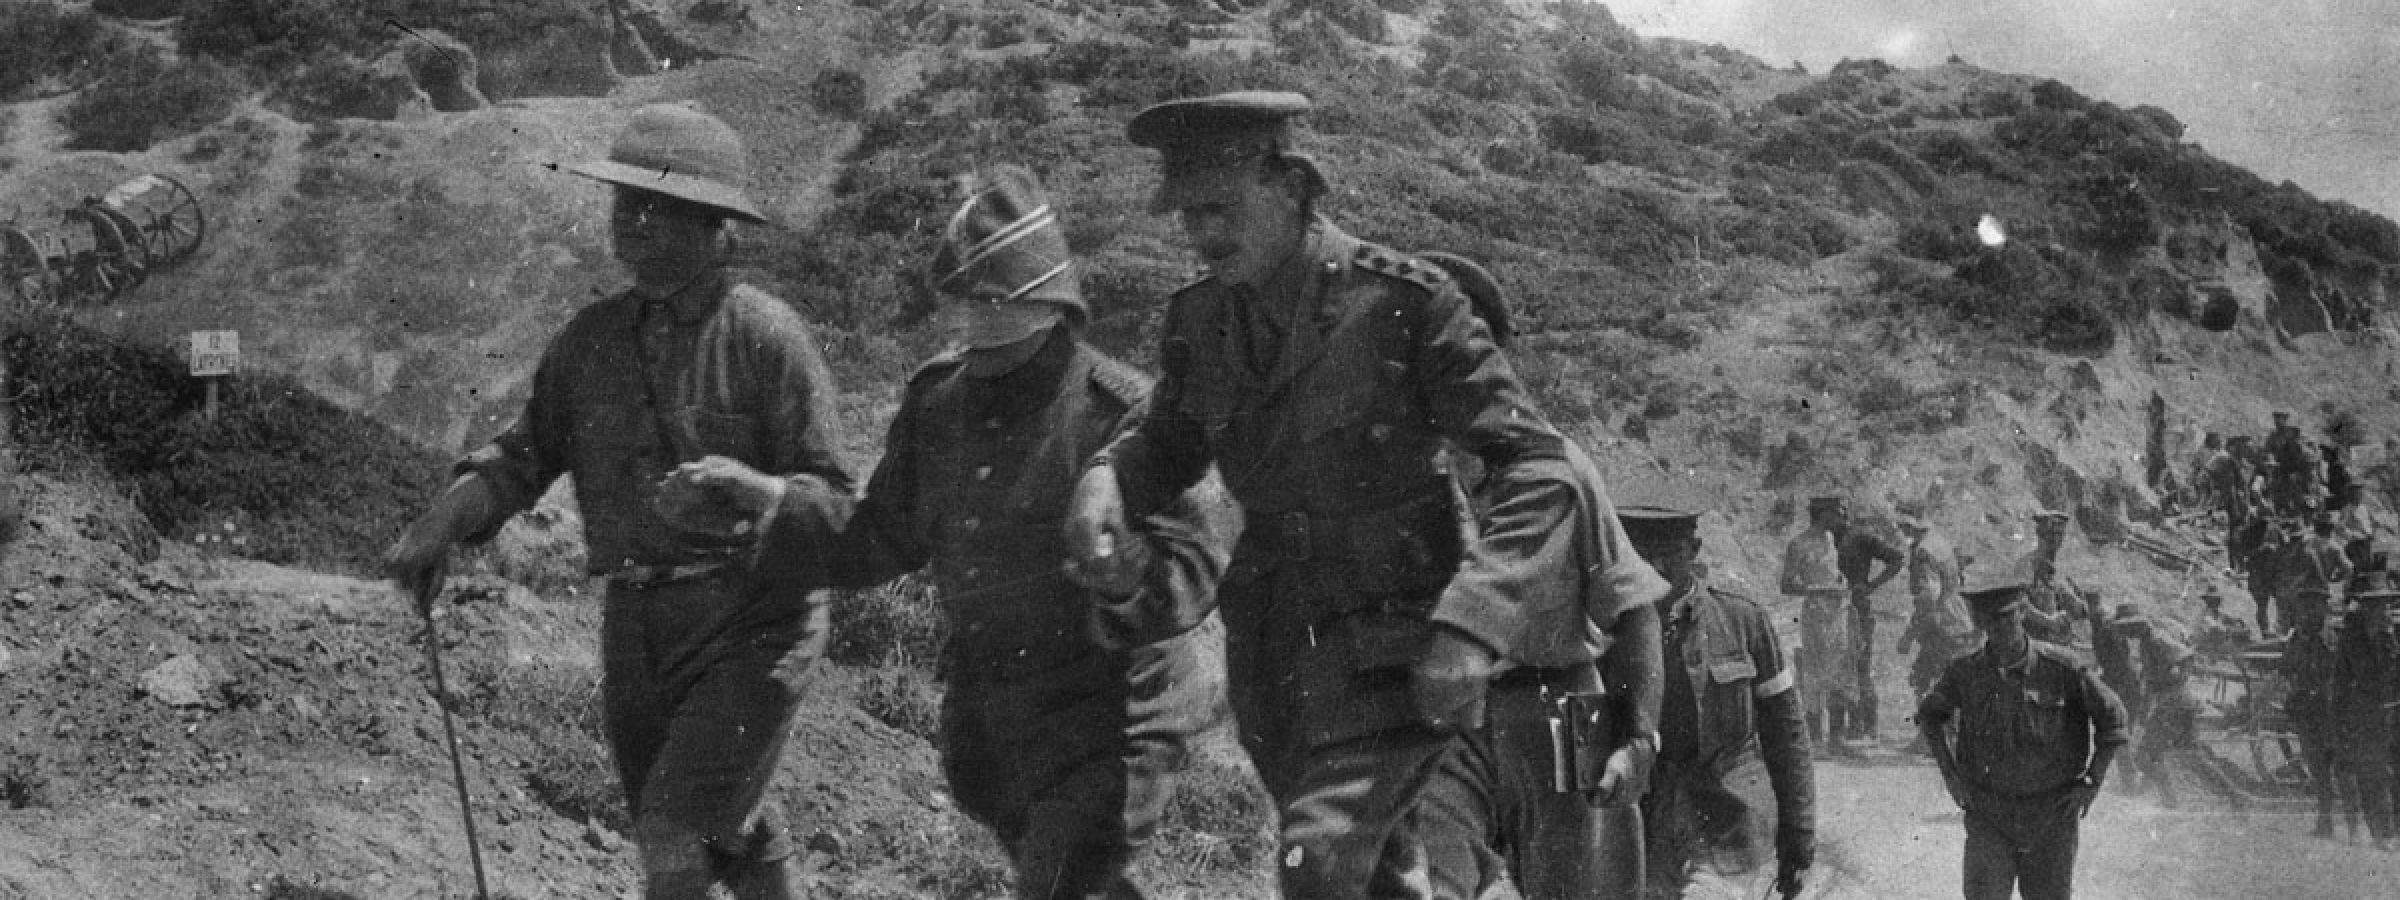 Major Kemal Ohri is led by the hand along the beach by two officers from Anzac headquarters as an envoy to negotiate an armistice to bury the dead.